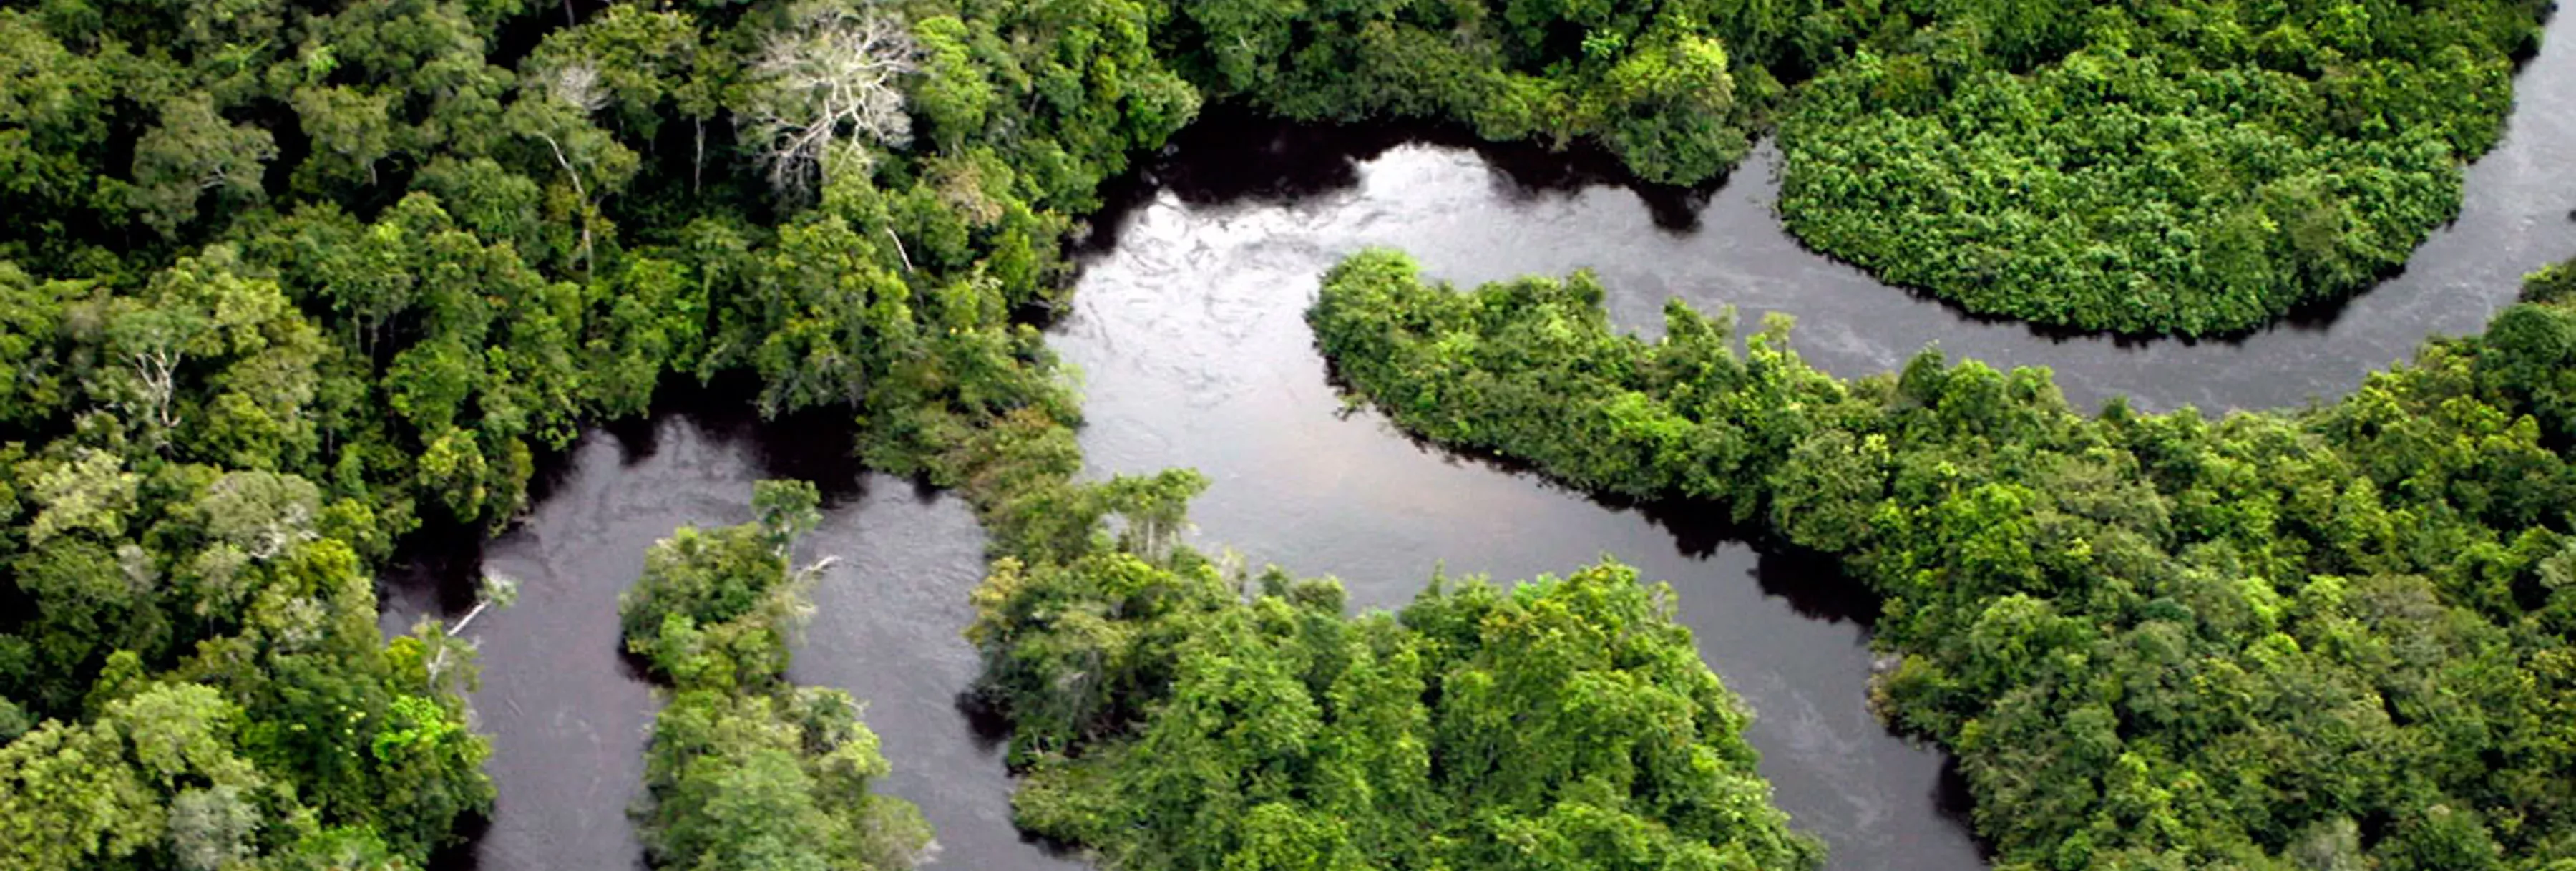 Above a winding river in the Amazon